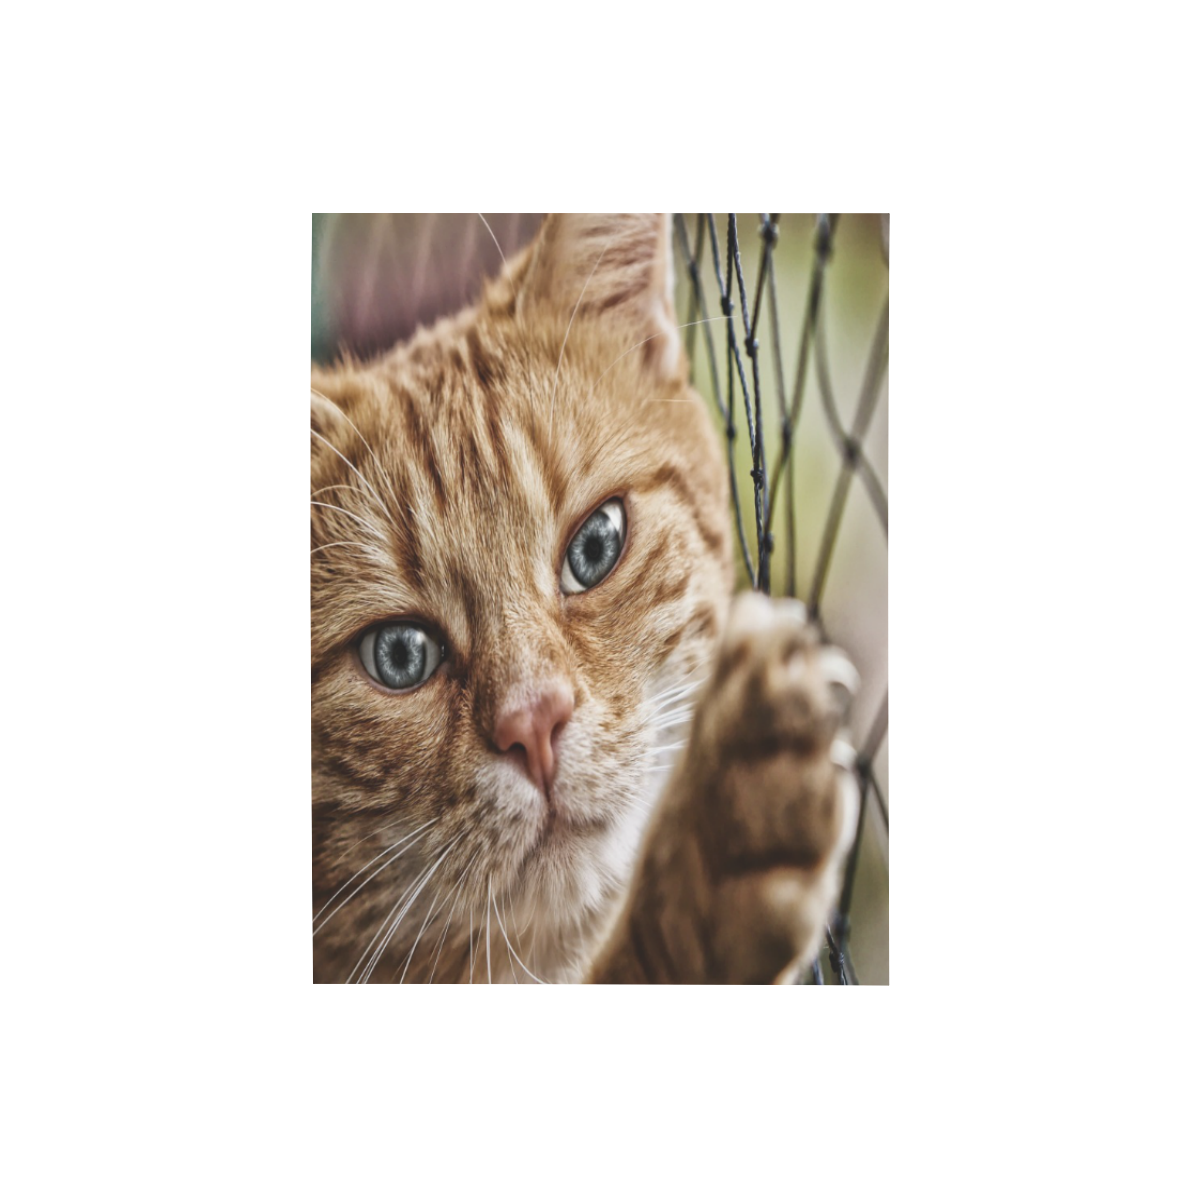 Orange Tabby And Fence Photo Panel for Tabletop Display 6"x8"